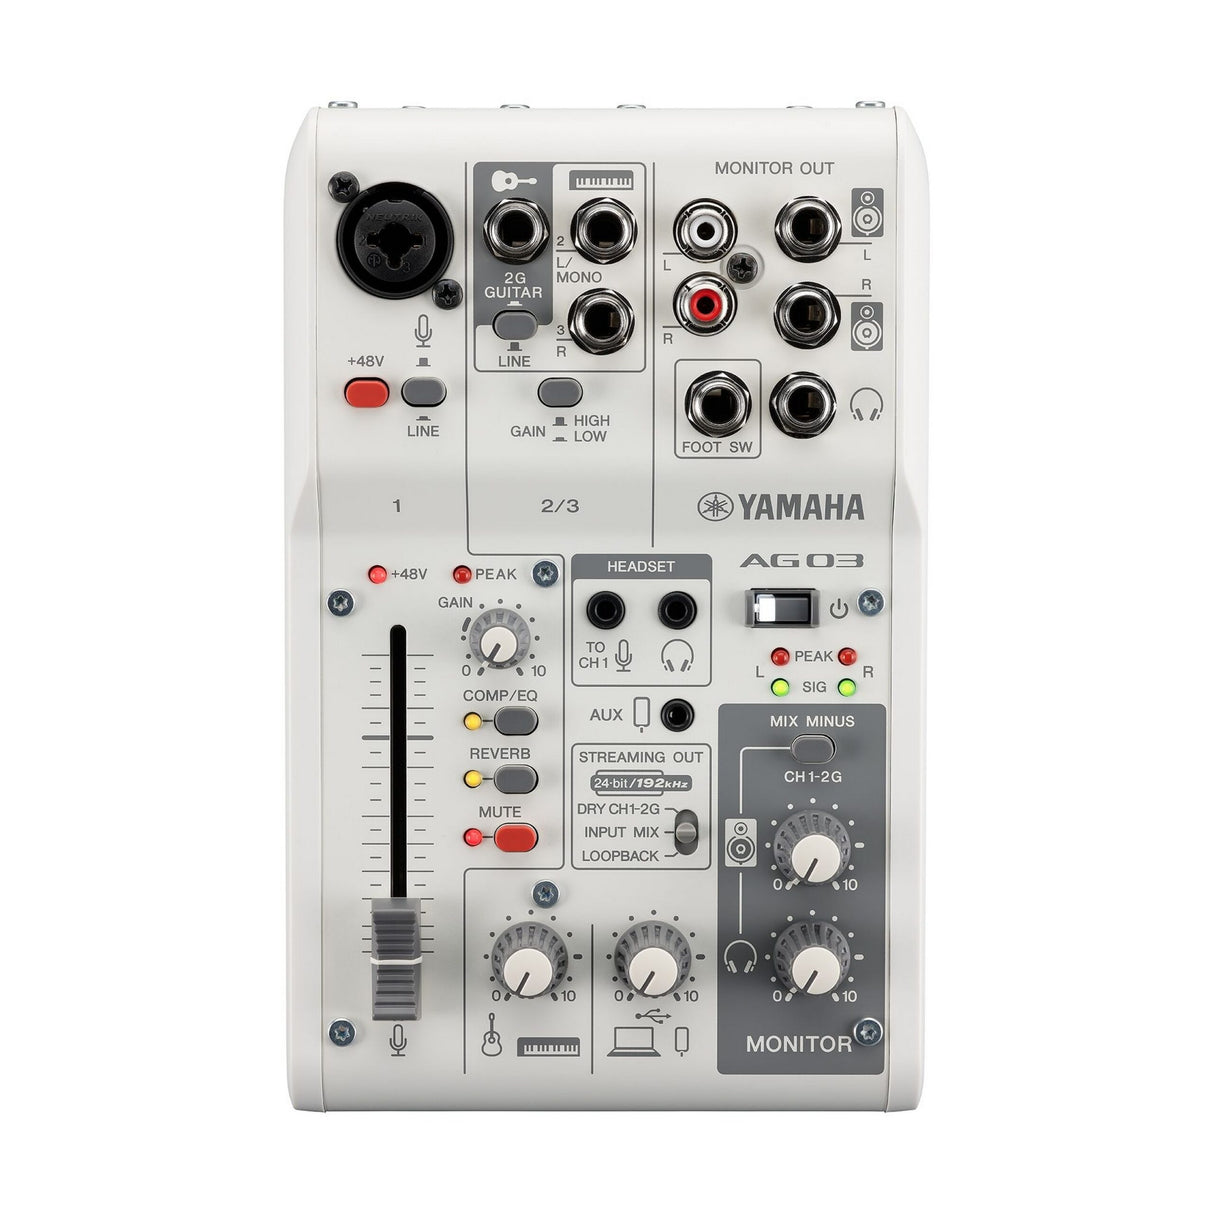 Yamaha AG03MK2 3-Channel Live Streaming USB Audio Interface Mixer, White